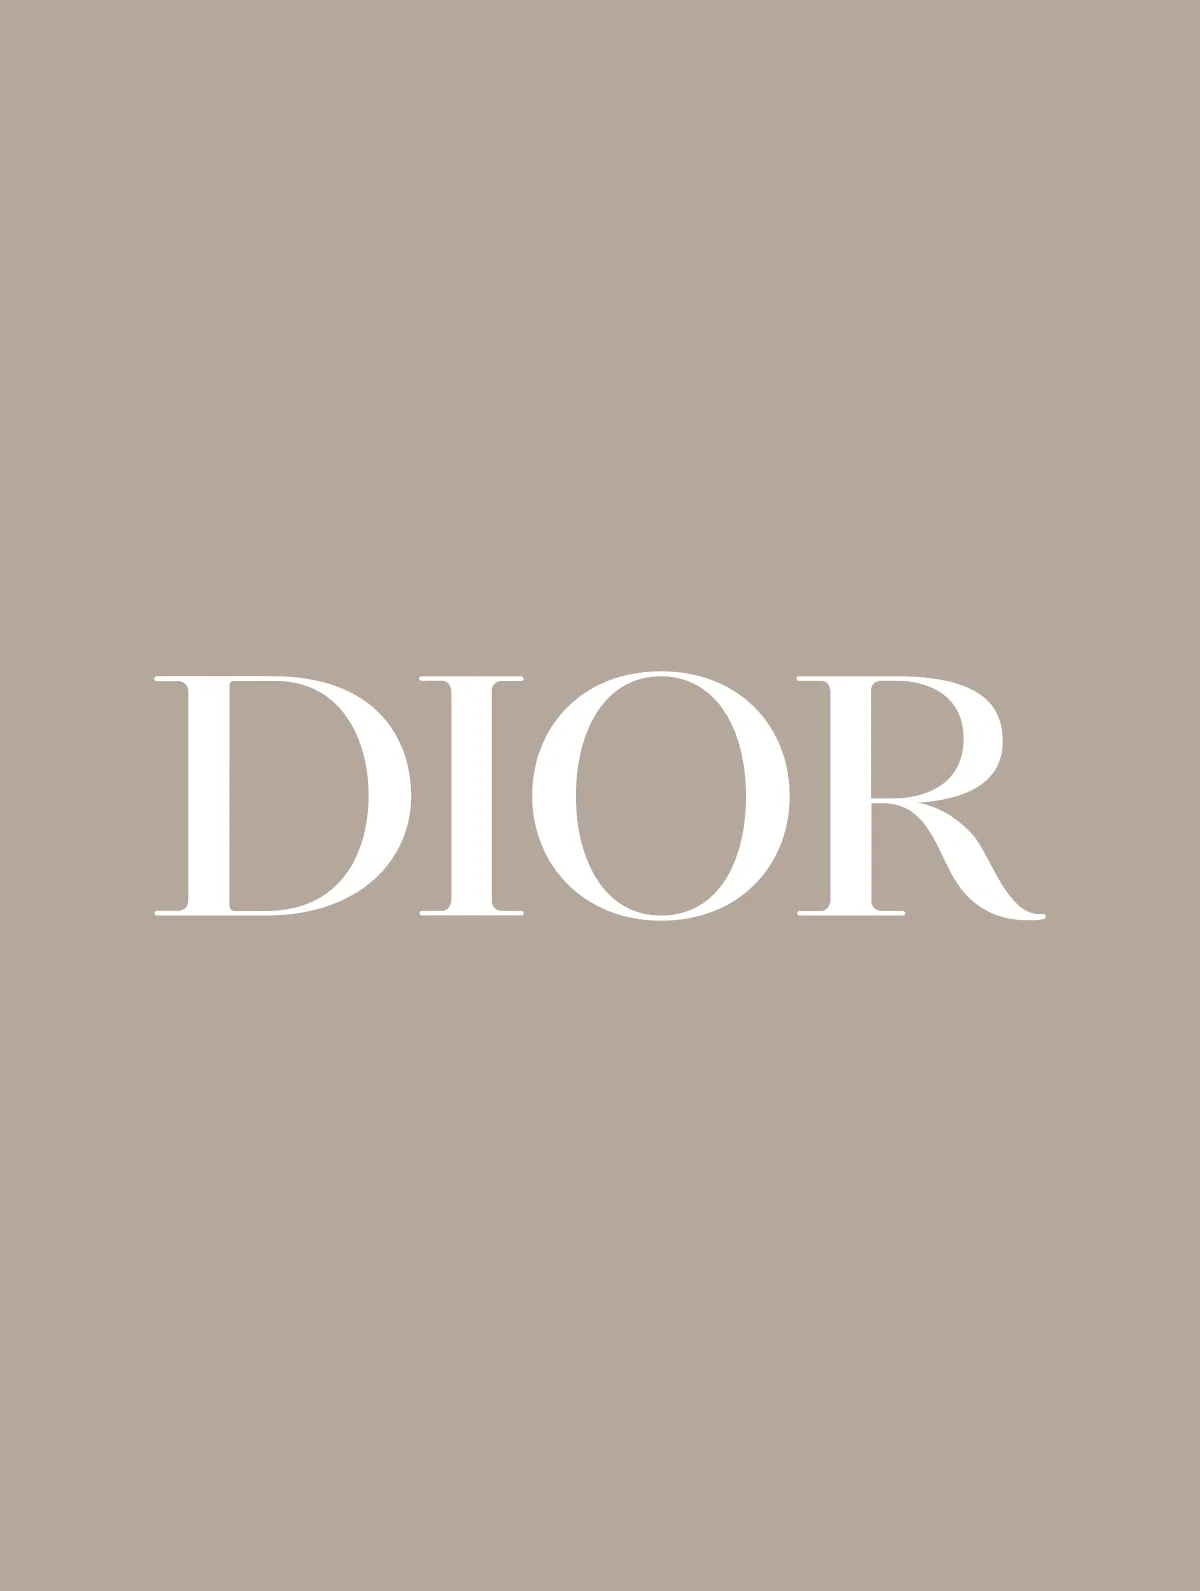 Dior - Dior, snapshots of beauty. - By HDG